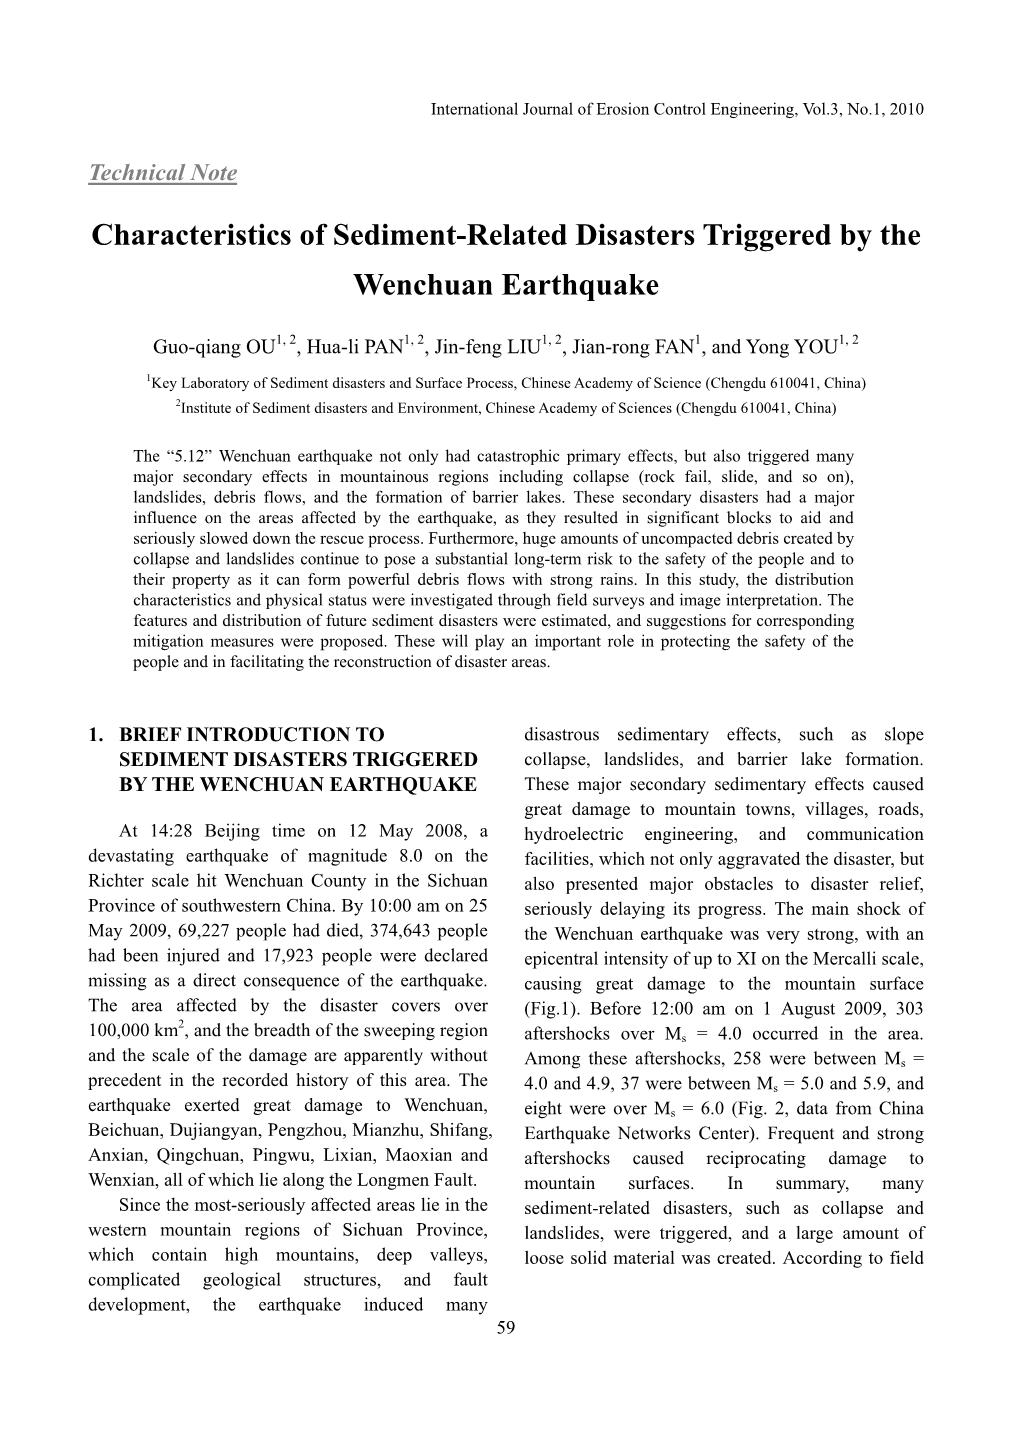 Characteristics of Sediment-Related Disasters Triggered by the Wenchuan Earthquake